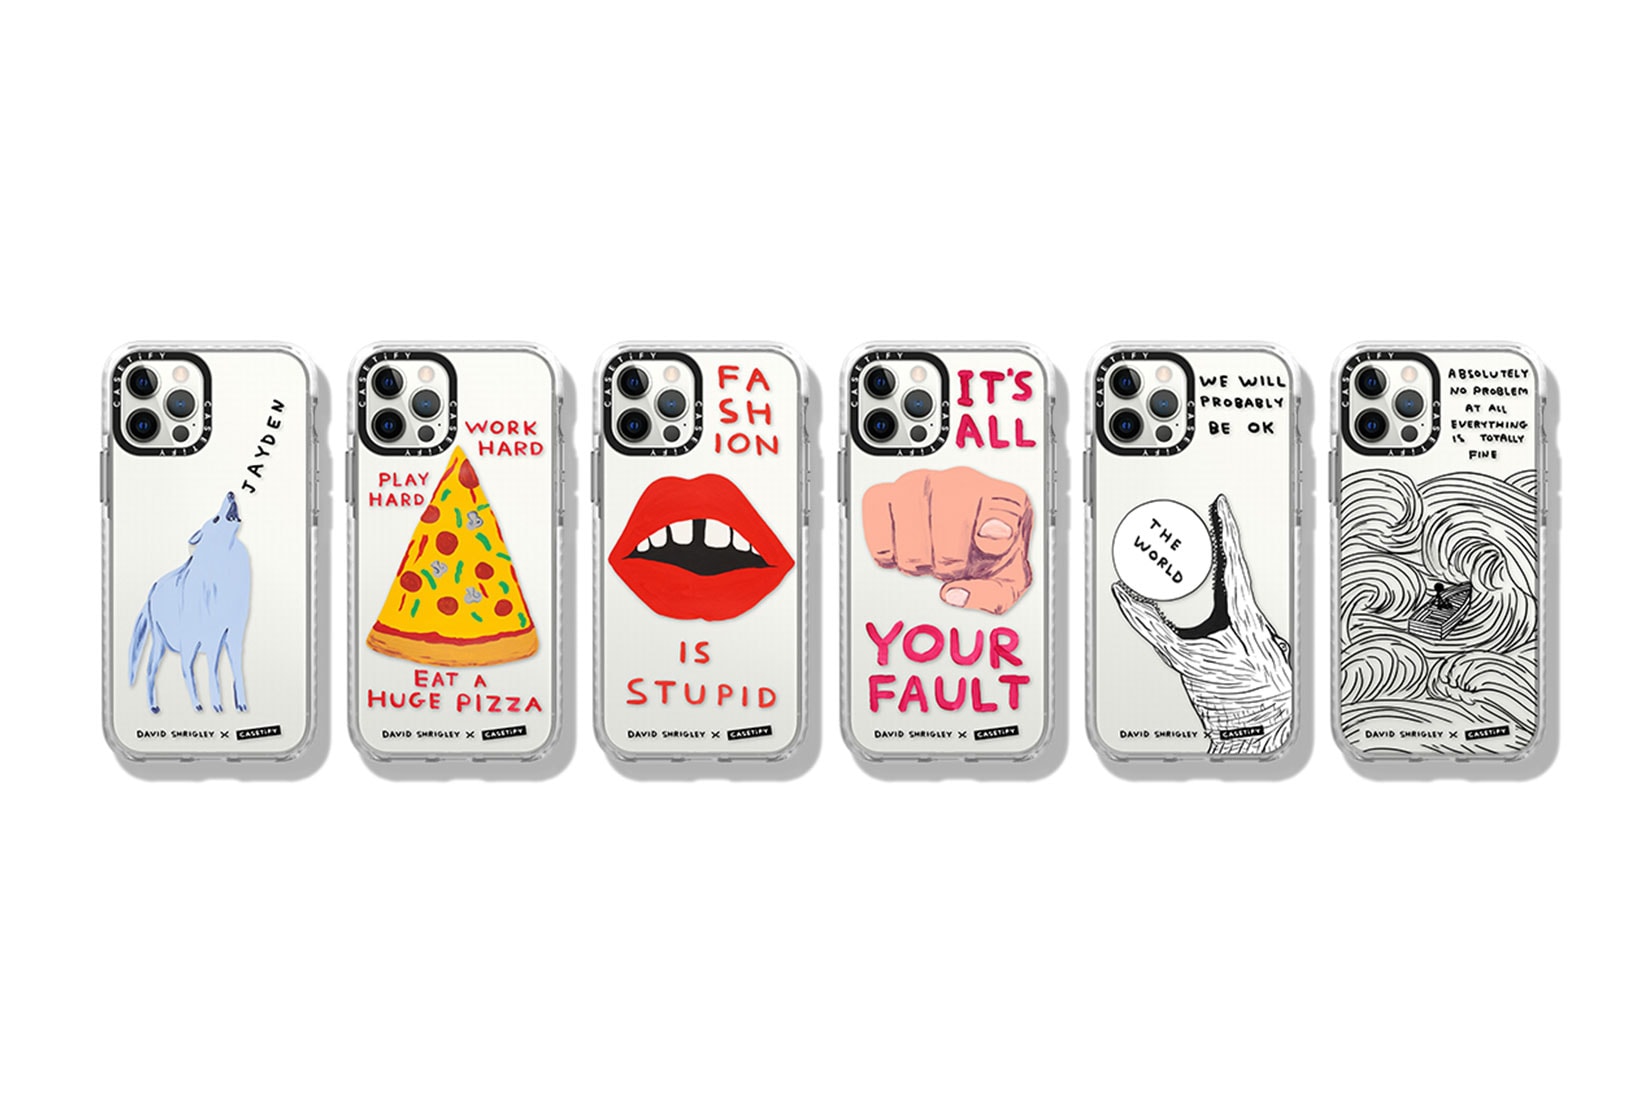 david shrigley casetify collaboration tech accessories iphone apple cases pizza lips hands